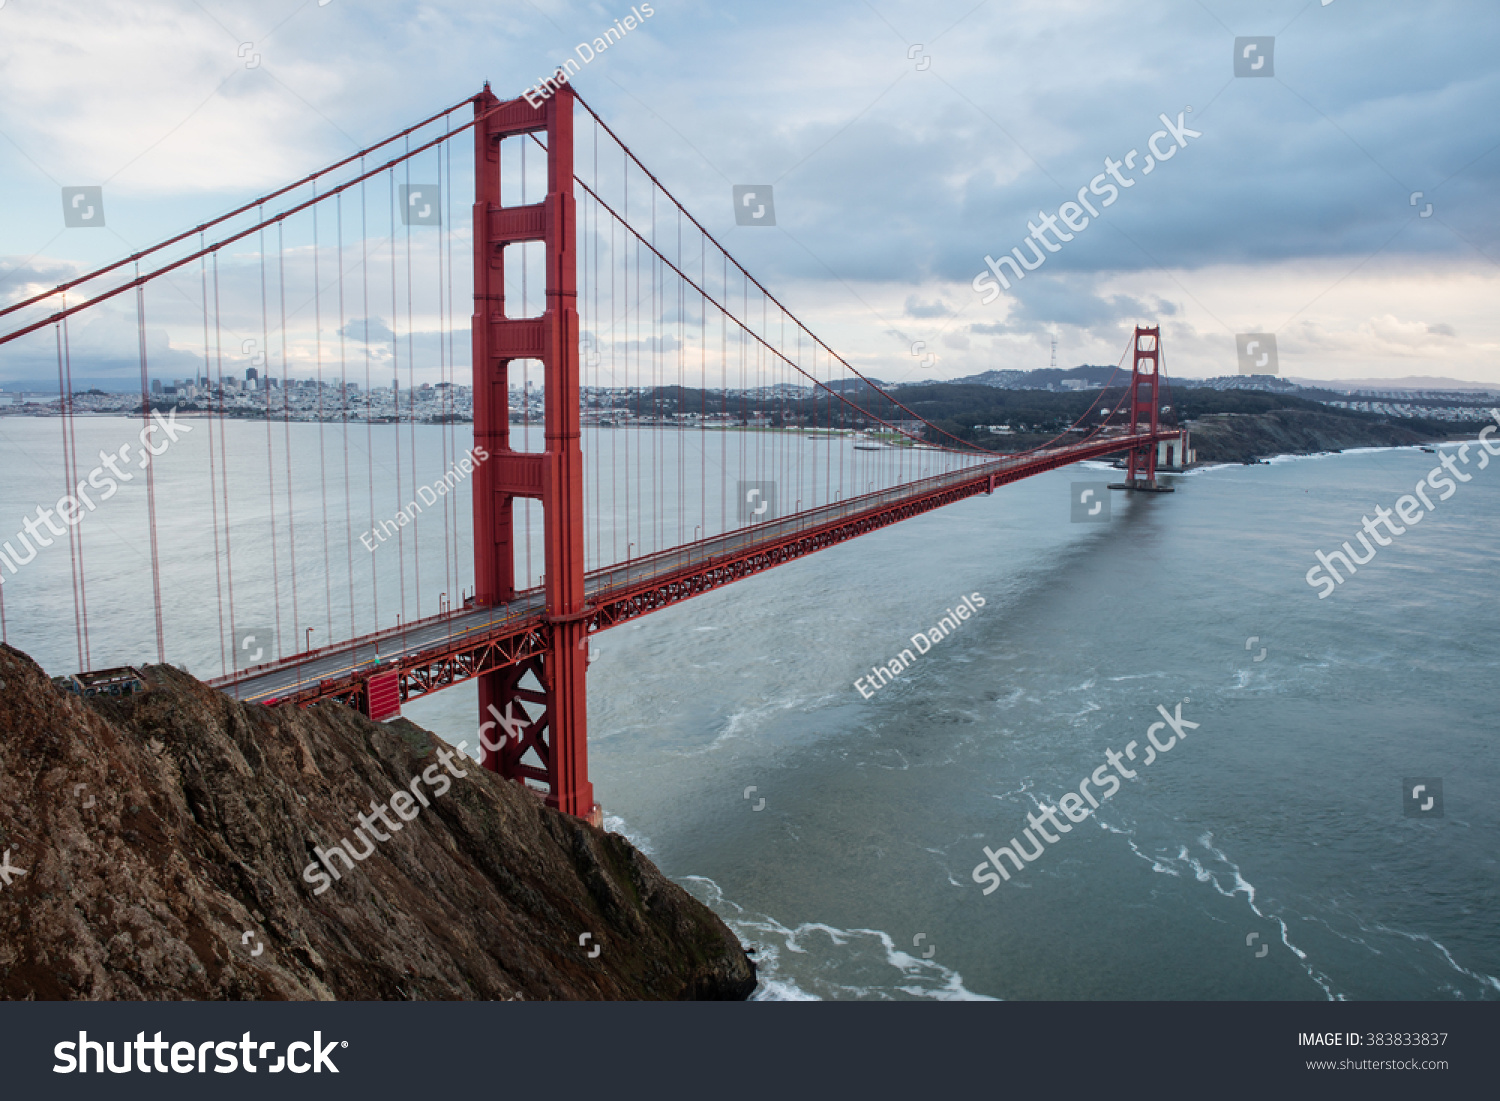 The iconic Golden Gate bridge extends across the San Francisco Bay from the Marin headlands to the beautiful city of San Francisco. The bridge is a symbol of the city and northern California. #383833837